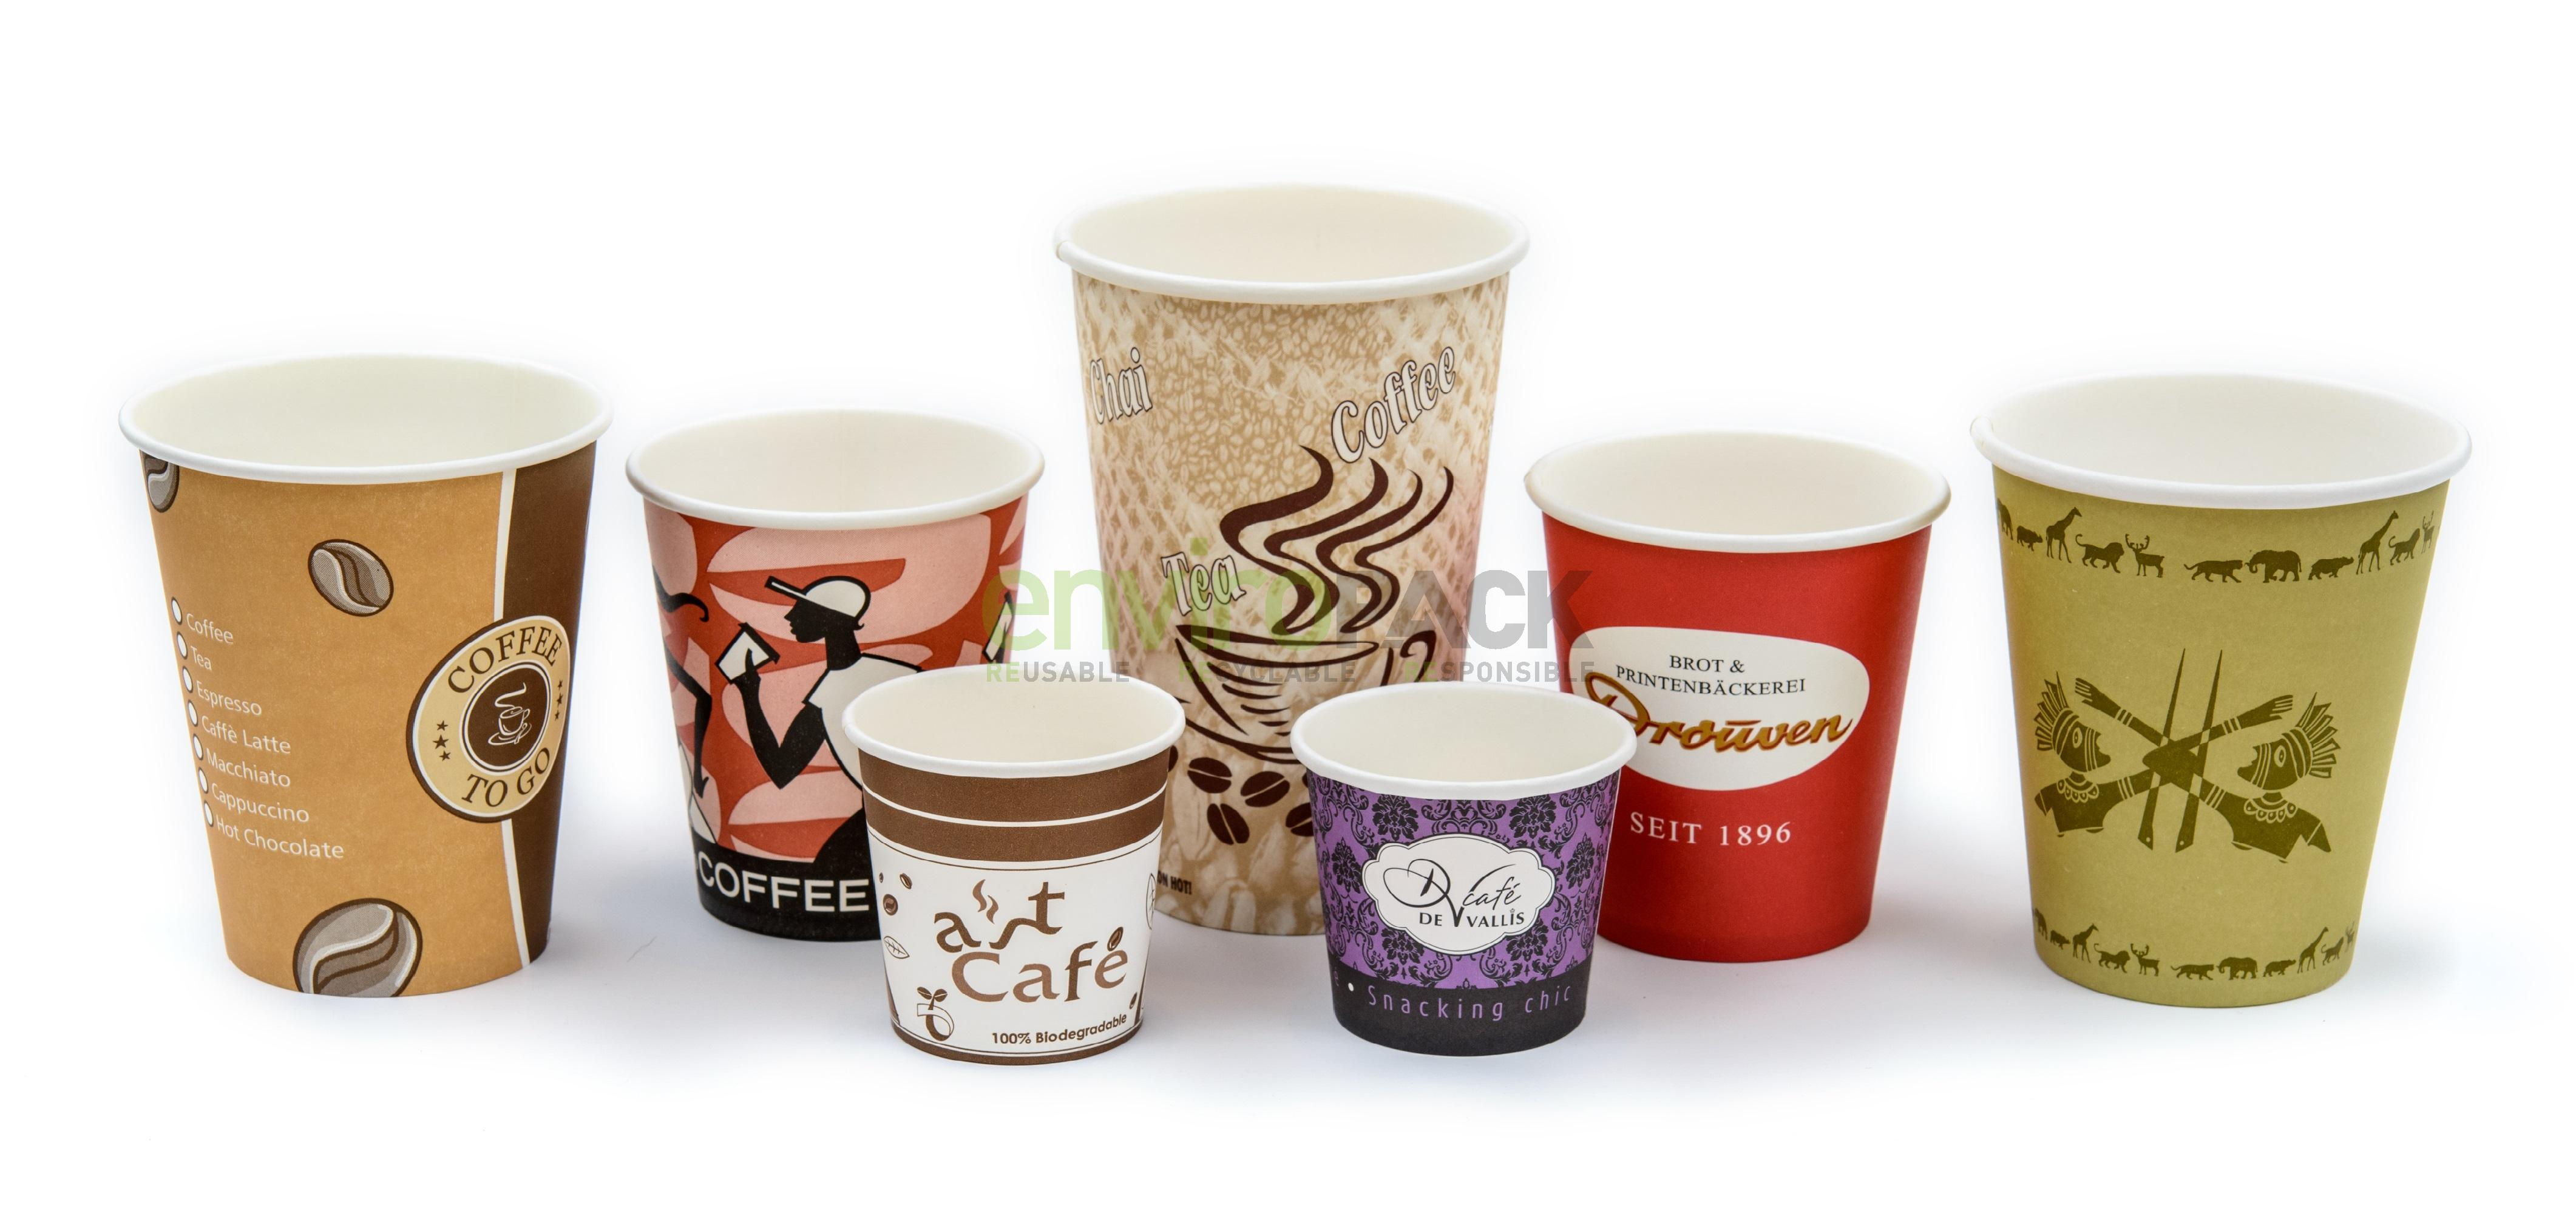 Printed Single Wall Paper Cups